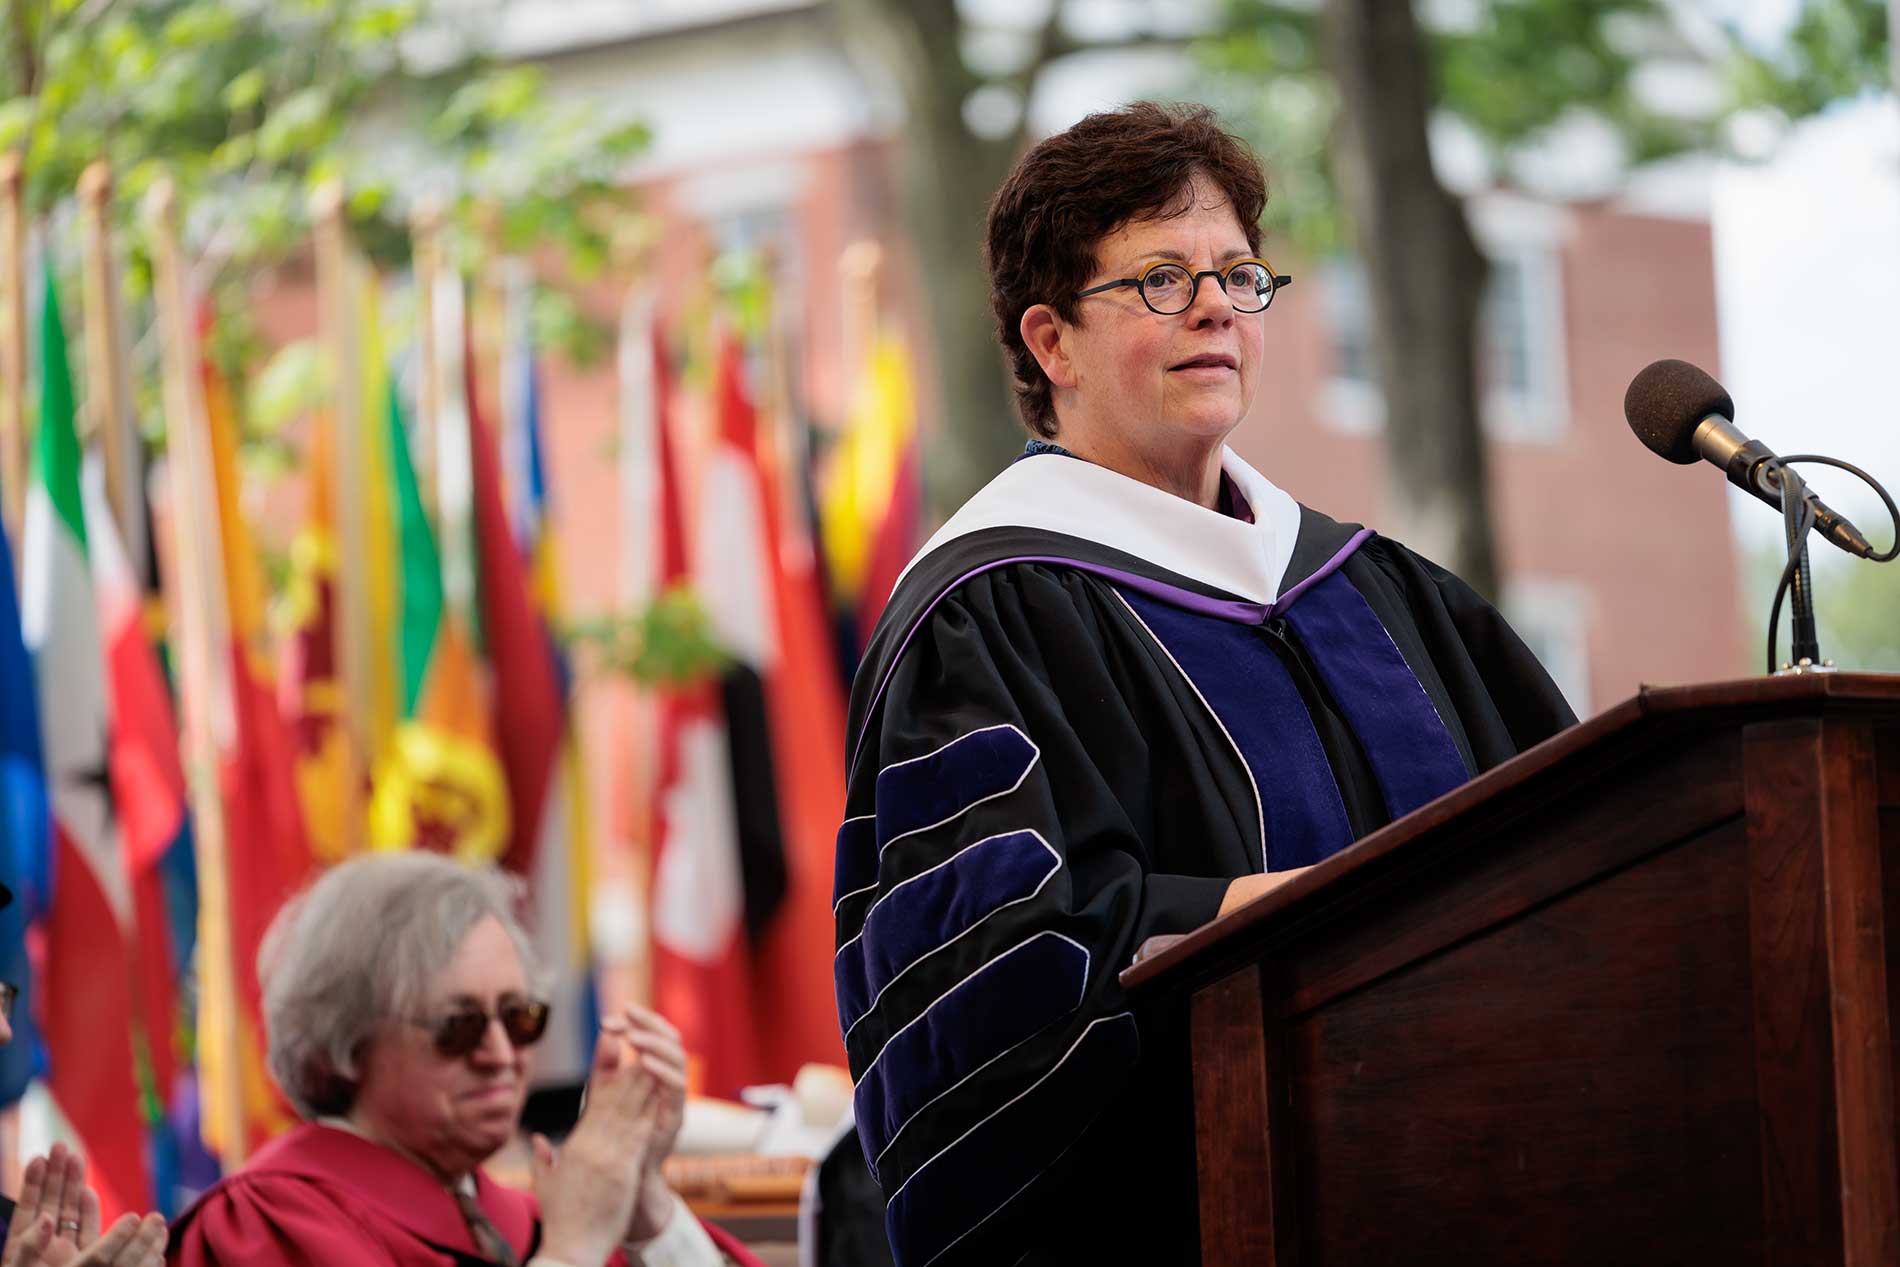 President Biddy Martin stands behind the podium on stage during commencement.